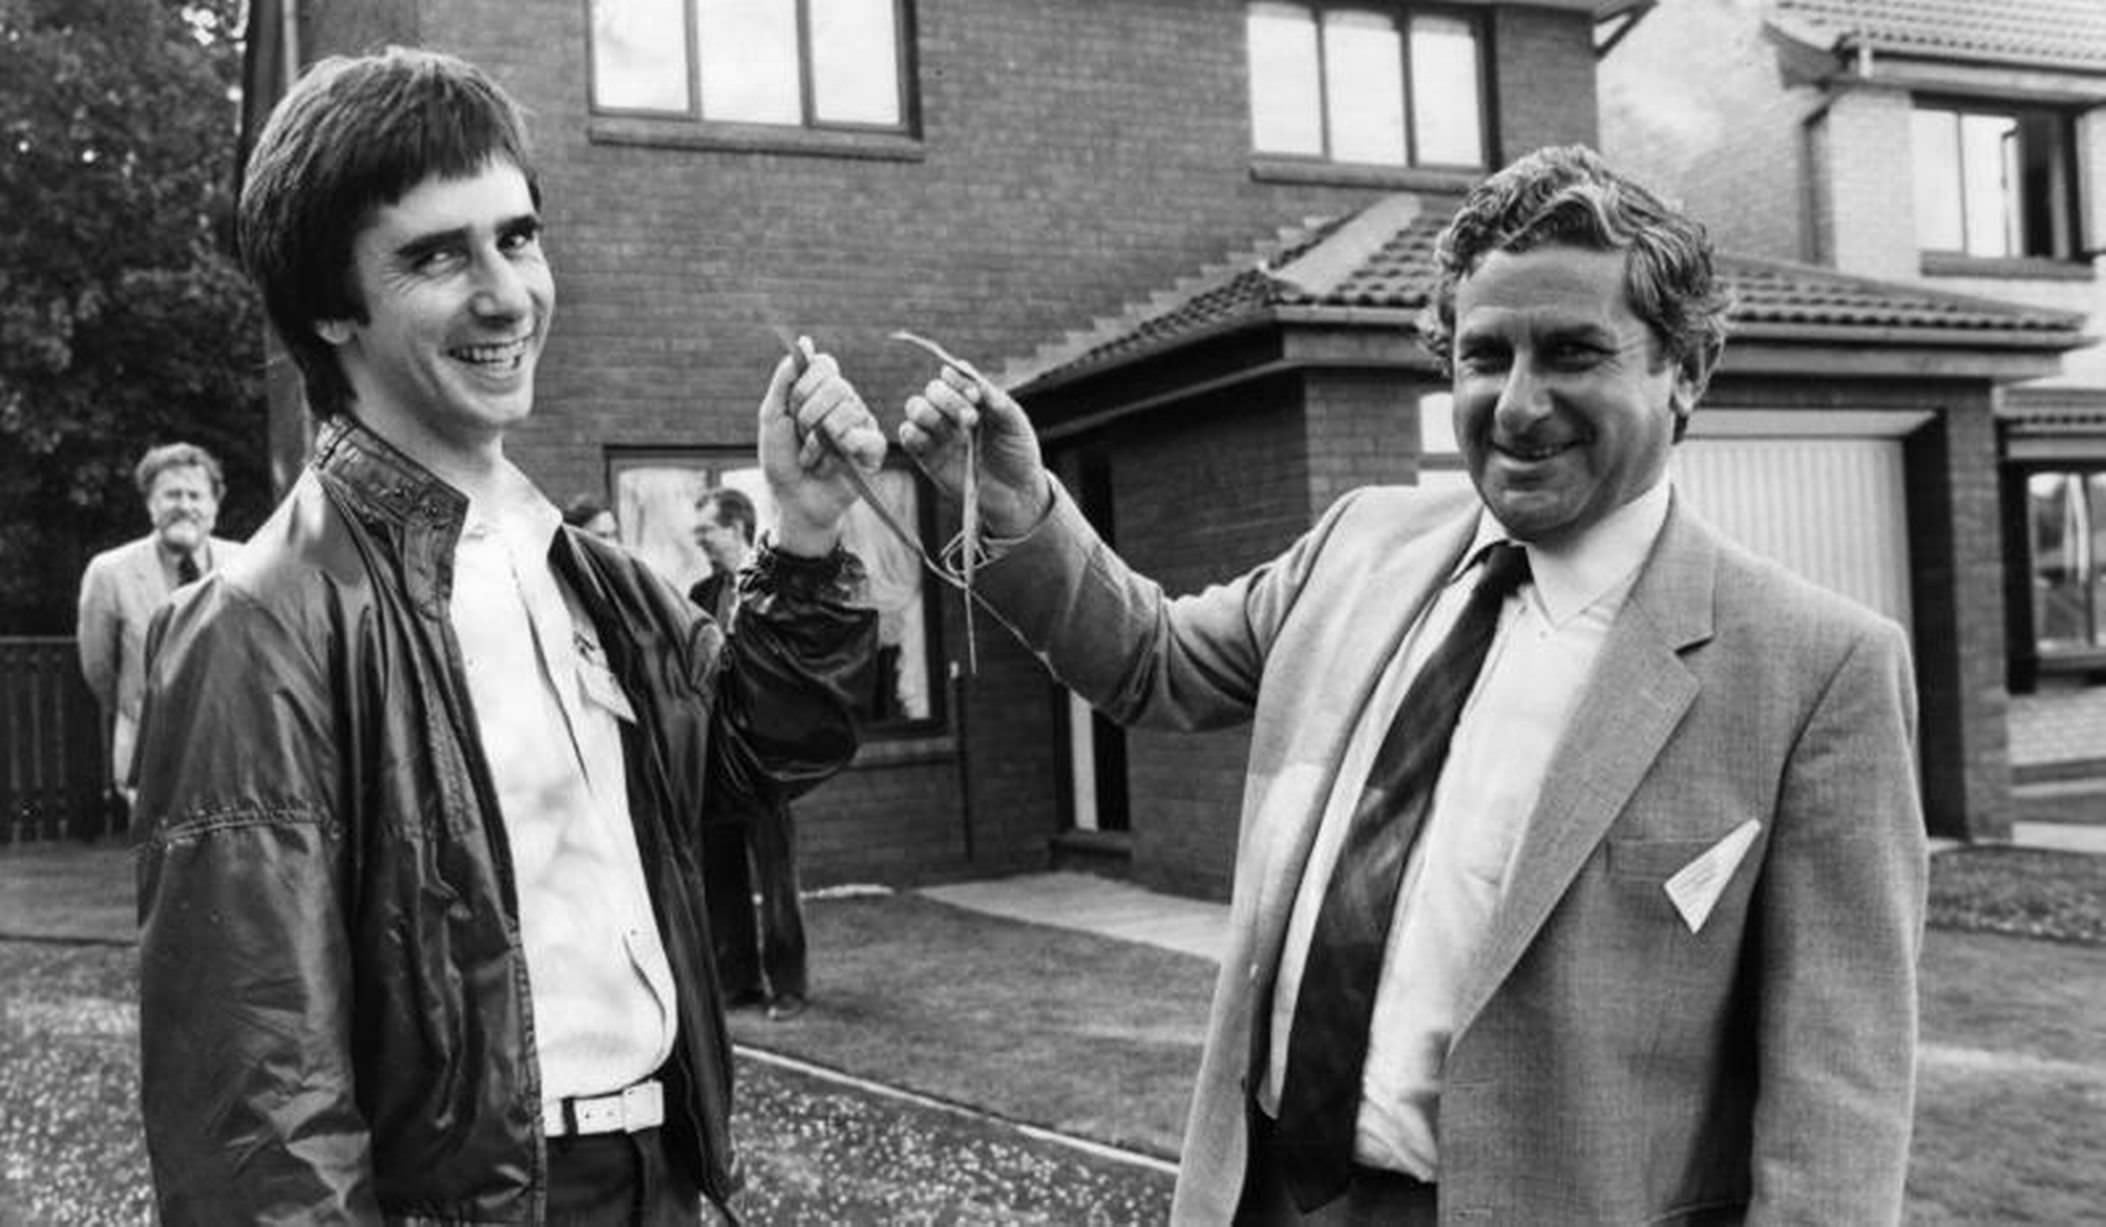 Soap opera Brookside, which was officially launched at Croxteth housing estate, Tuesday 10th August 1982